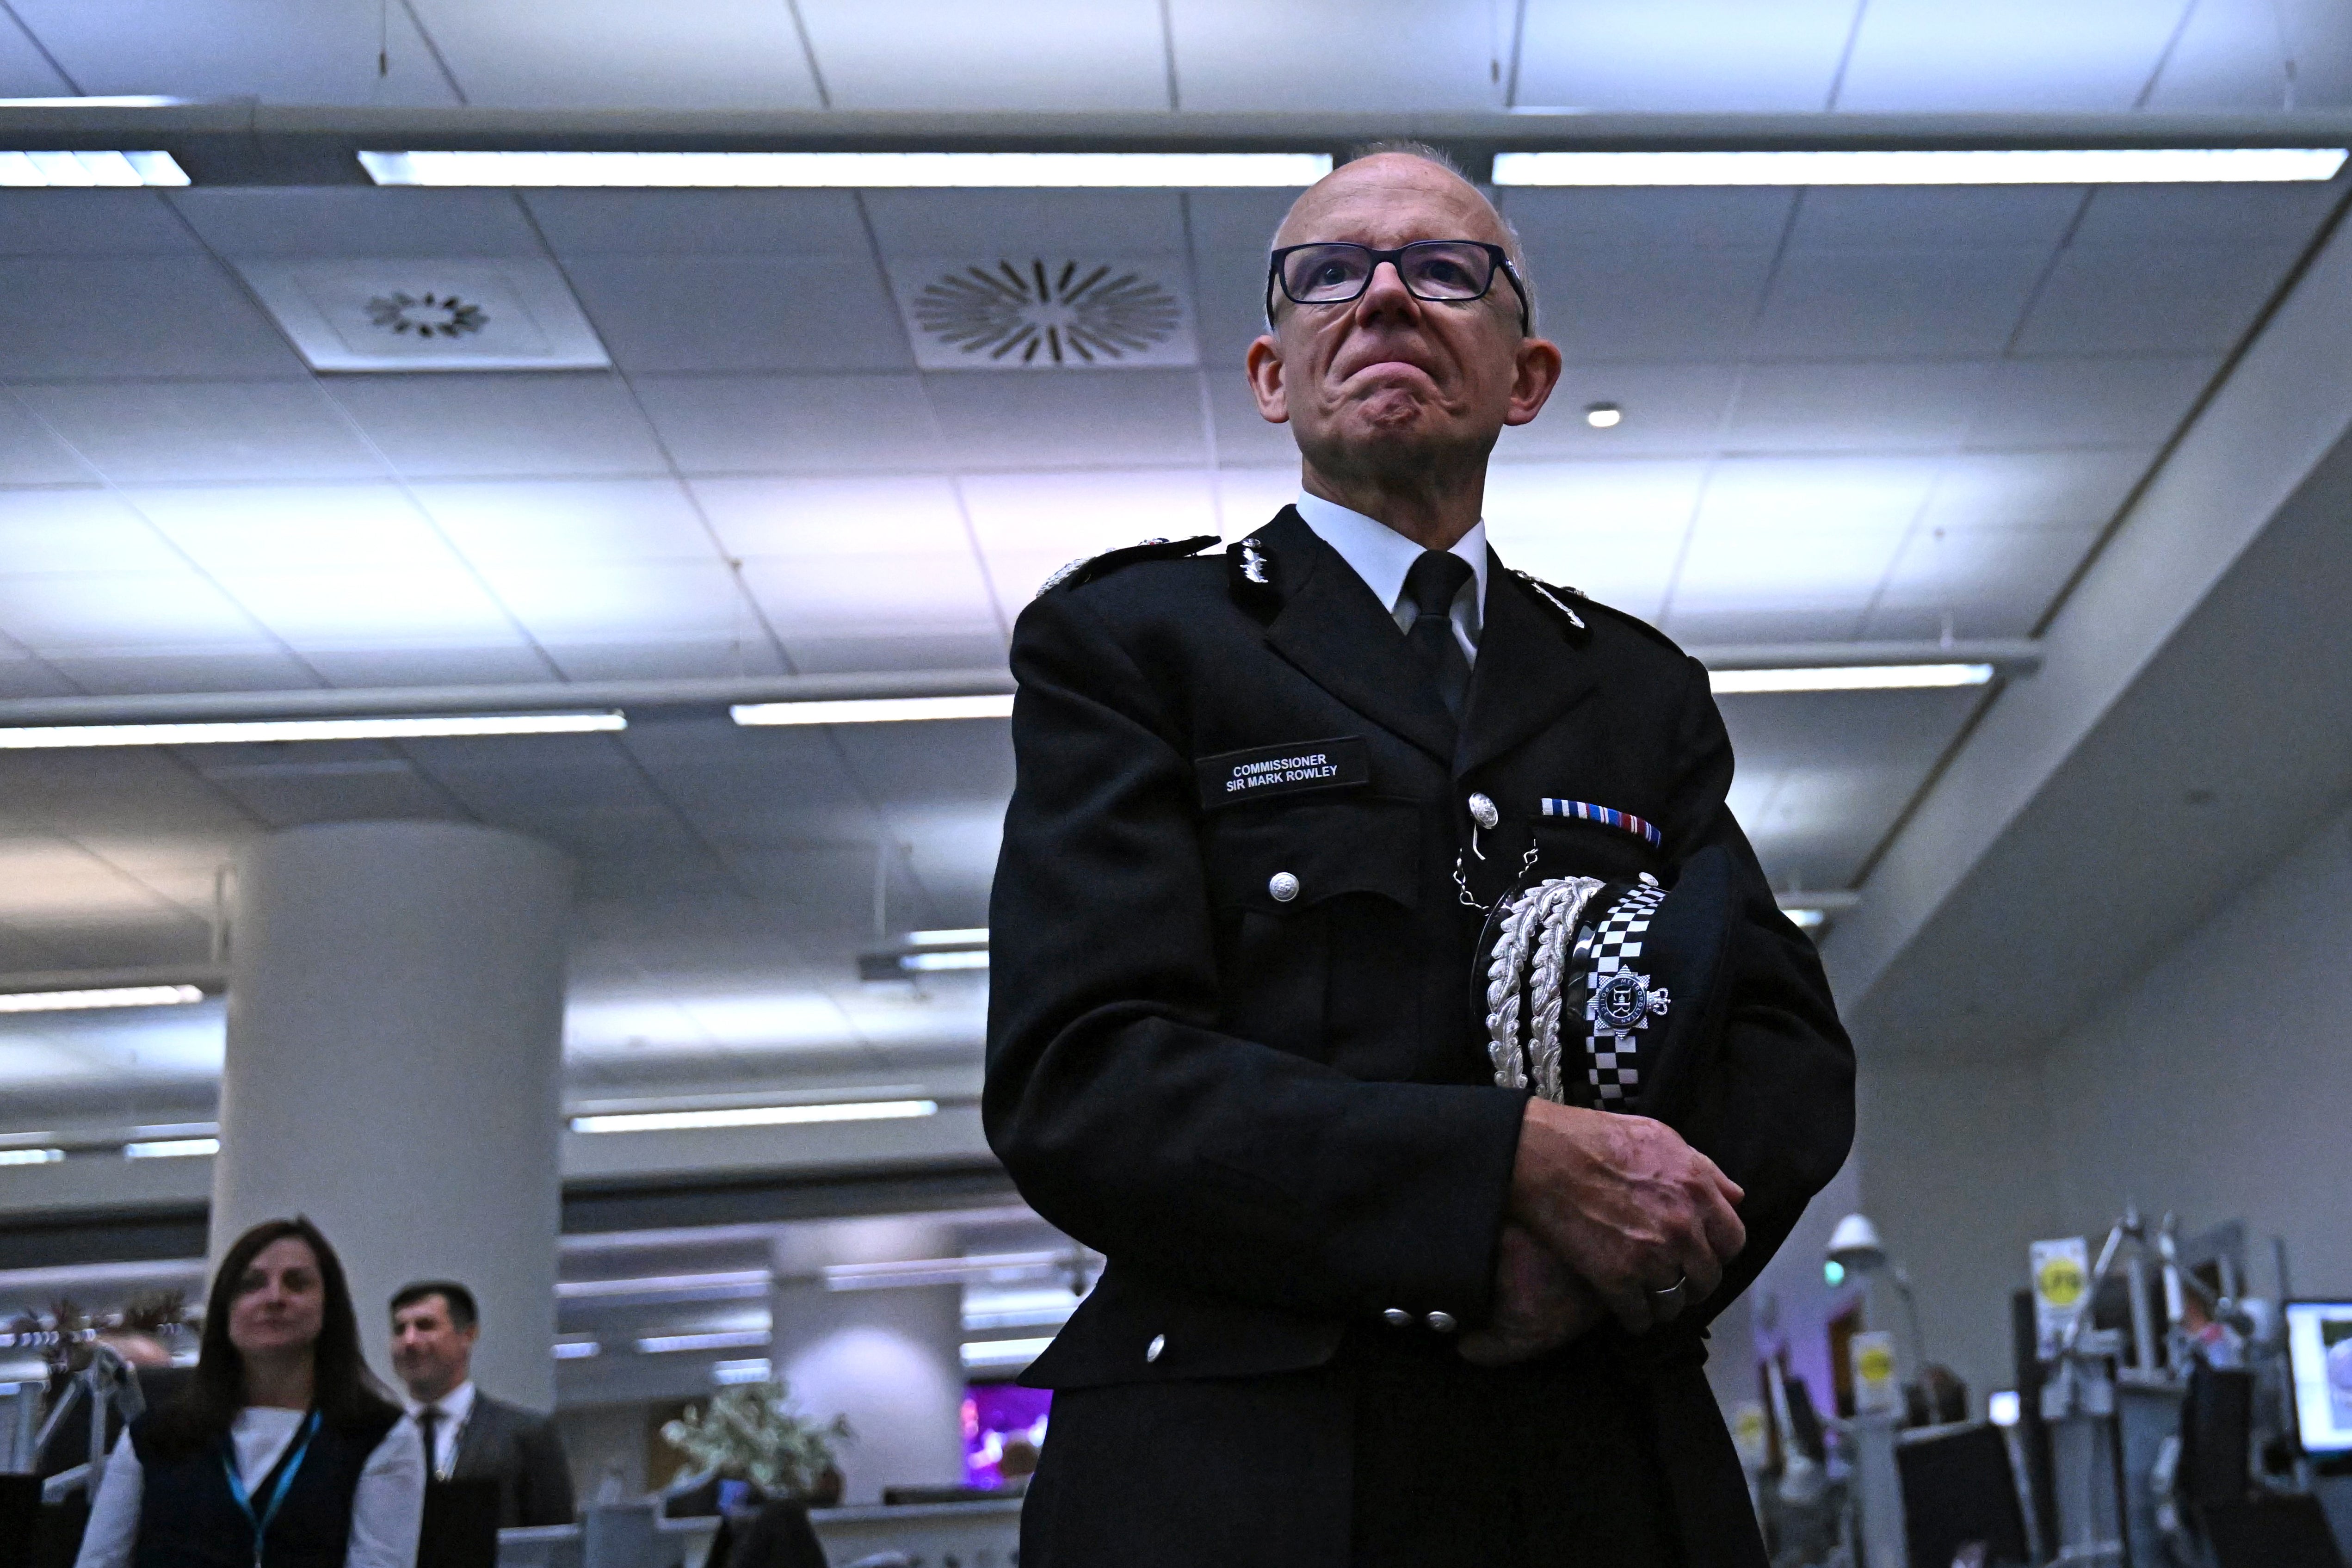 Metropolitan Police Commissioner Sir Mark Rowley said he will continue to search for a meaningful partnership with those who will speak truth to power and help the force reform (Carl de Souza/PA)